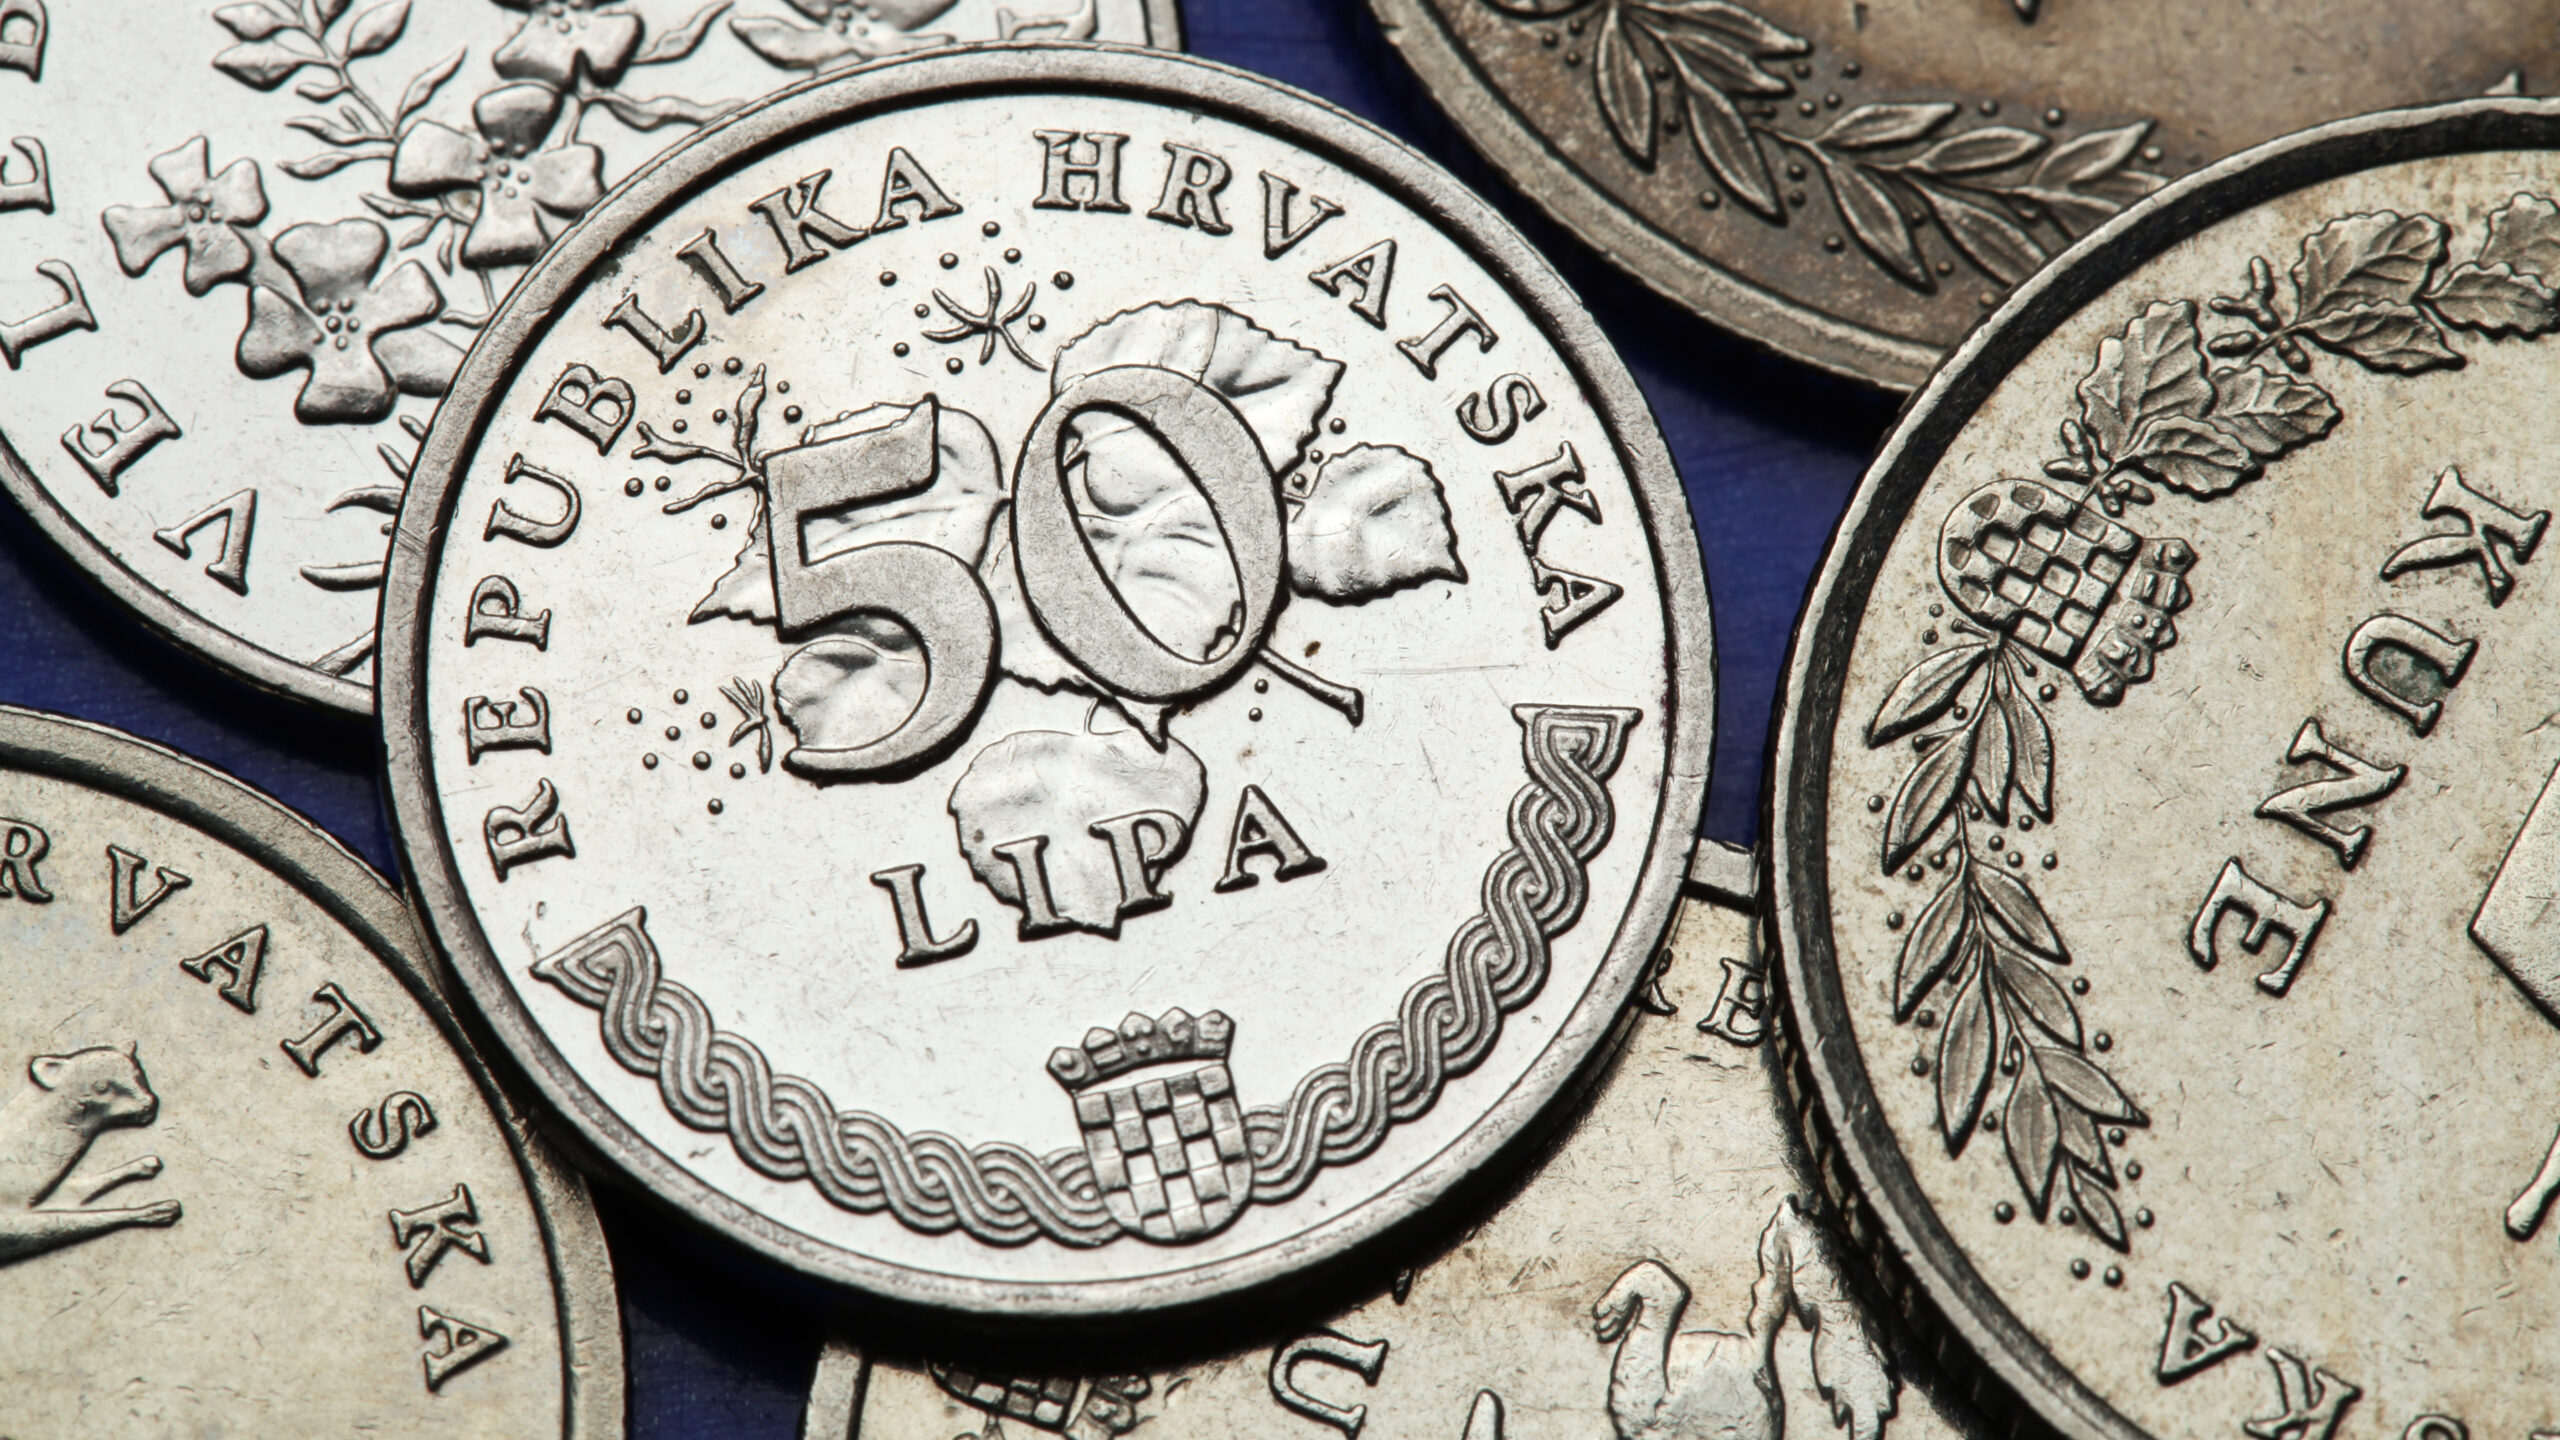 Kuna to Euro - how the currency used in Croatia is changing to the Euro in 2023